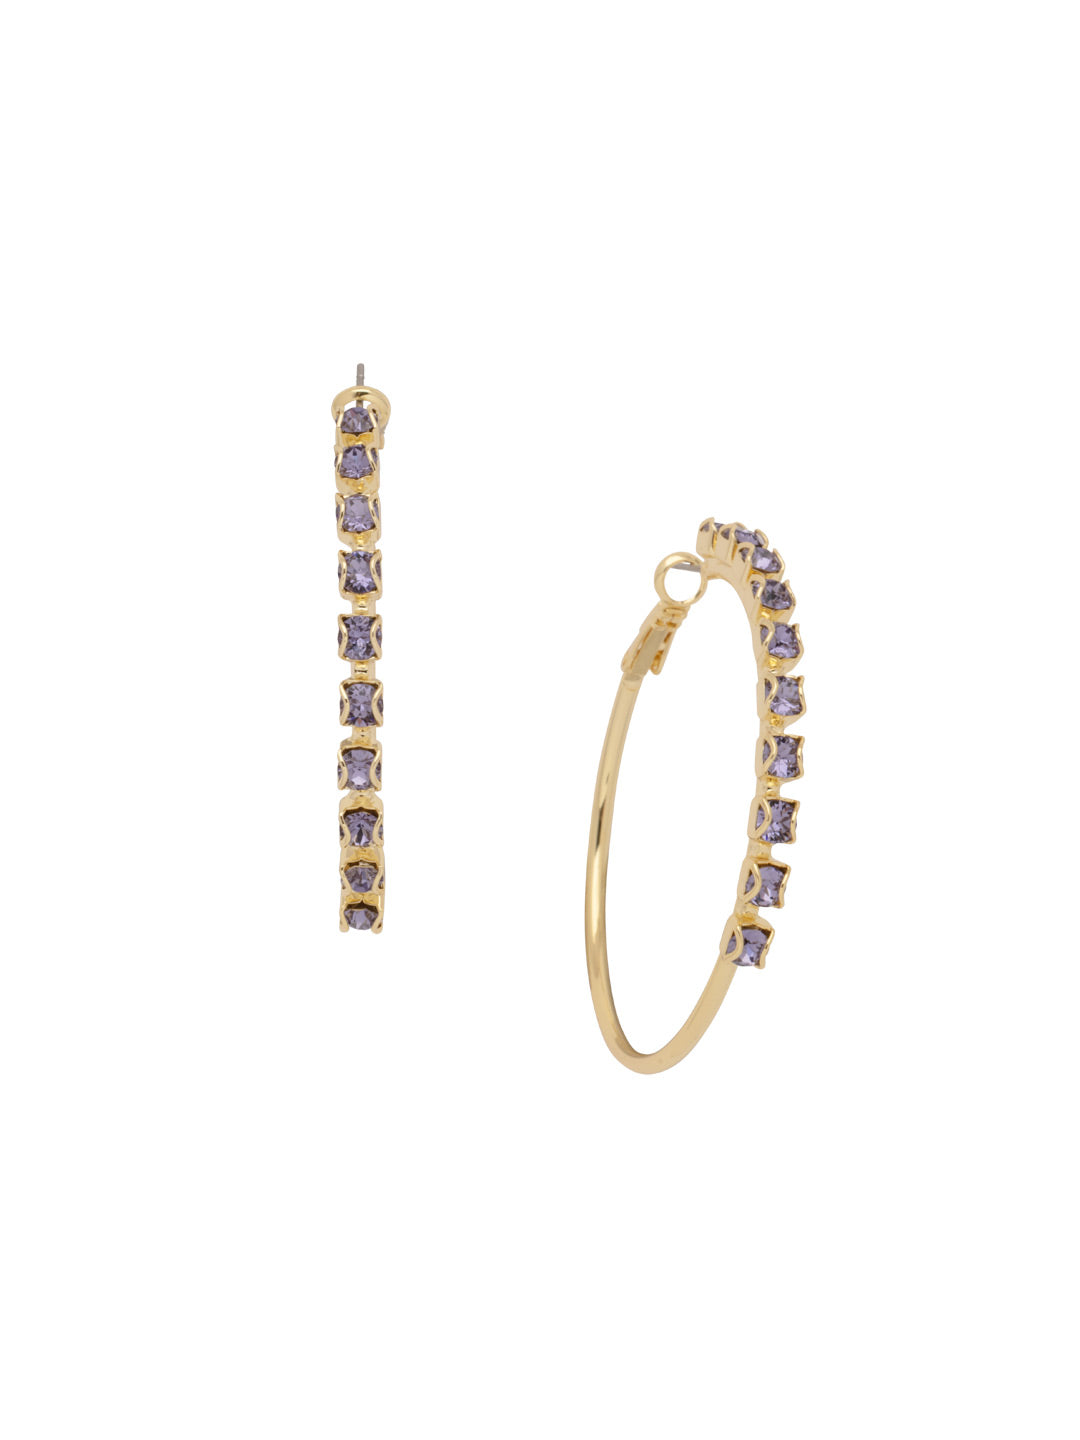 Bessie Hoop Earrings - EFF42BGHBR - <p>The Bessie Hoop Earrings feature a row of crystals on a classic metal hoop. From Sorrelli's Happy Birthday Redux collection in our Bright Gold-tone finish.</p>